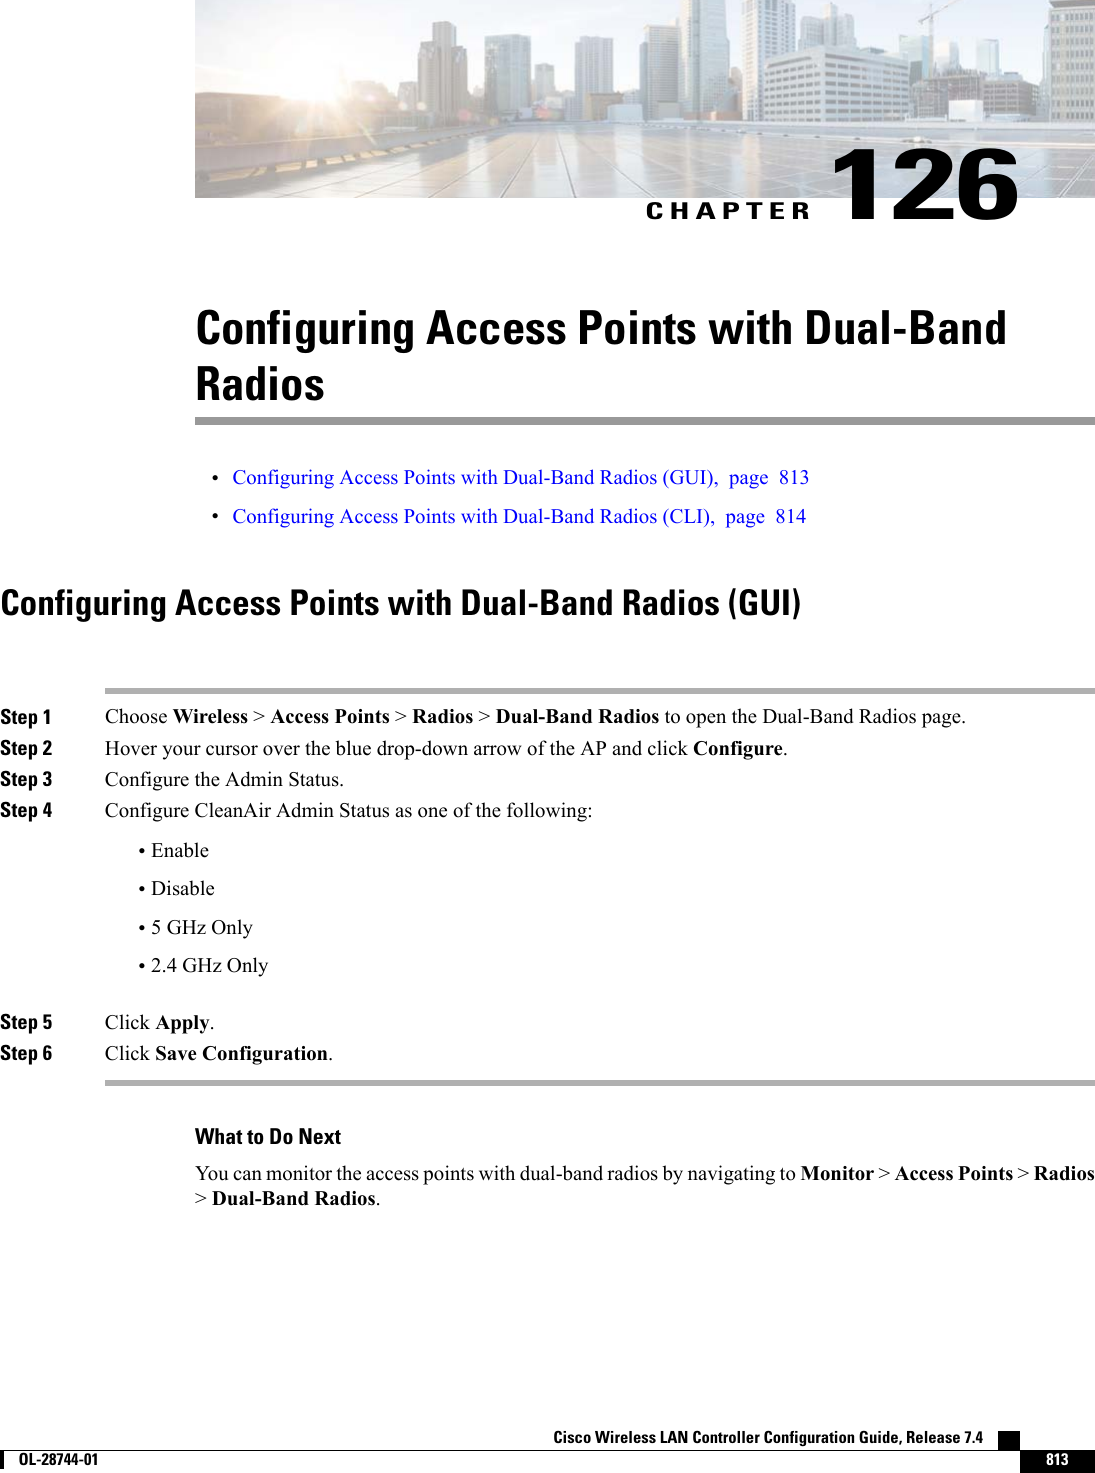 CHAPTER 126Configuring Access Points with Dual-BandRadios•Configuring Access Points with Dual-Band Radios (GUI), page 813•Configuring Access Points with Dual-Band Radios (CLI), page 814Configuring Access Points with Dual-Band Radios (GUI)Step 1 Choose Wireless &gt;Access Points &gt;Radios &gt;Dual-Band Radios to open the Dual-Band Radios page.Step 2 Hover your cursor over the blue drop-down arrow of the AP and click Configure.Step 3 Configure the Admin Status.Step 4 Configure CleanAir Admin Status as one of the following:•Enable•Disable•5 GHz Only•2.4 GHz OnlyStep 5 Click Apply.Step 6 Click Save Configuration.What to Do NextYou can monitor the access points with dual-band radios by navigating to Monitor &gt;Access Points &gt;Radios&gt;Dual-Band Radios.Cisco Wireless LAN Controller Configuration Guide, Release 7.4        OL-28744-01 813